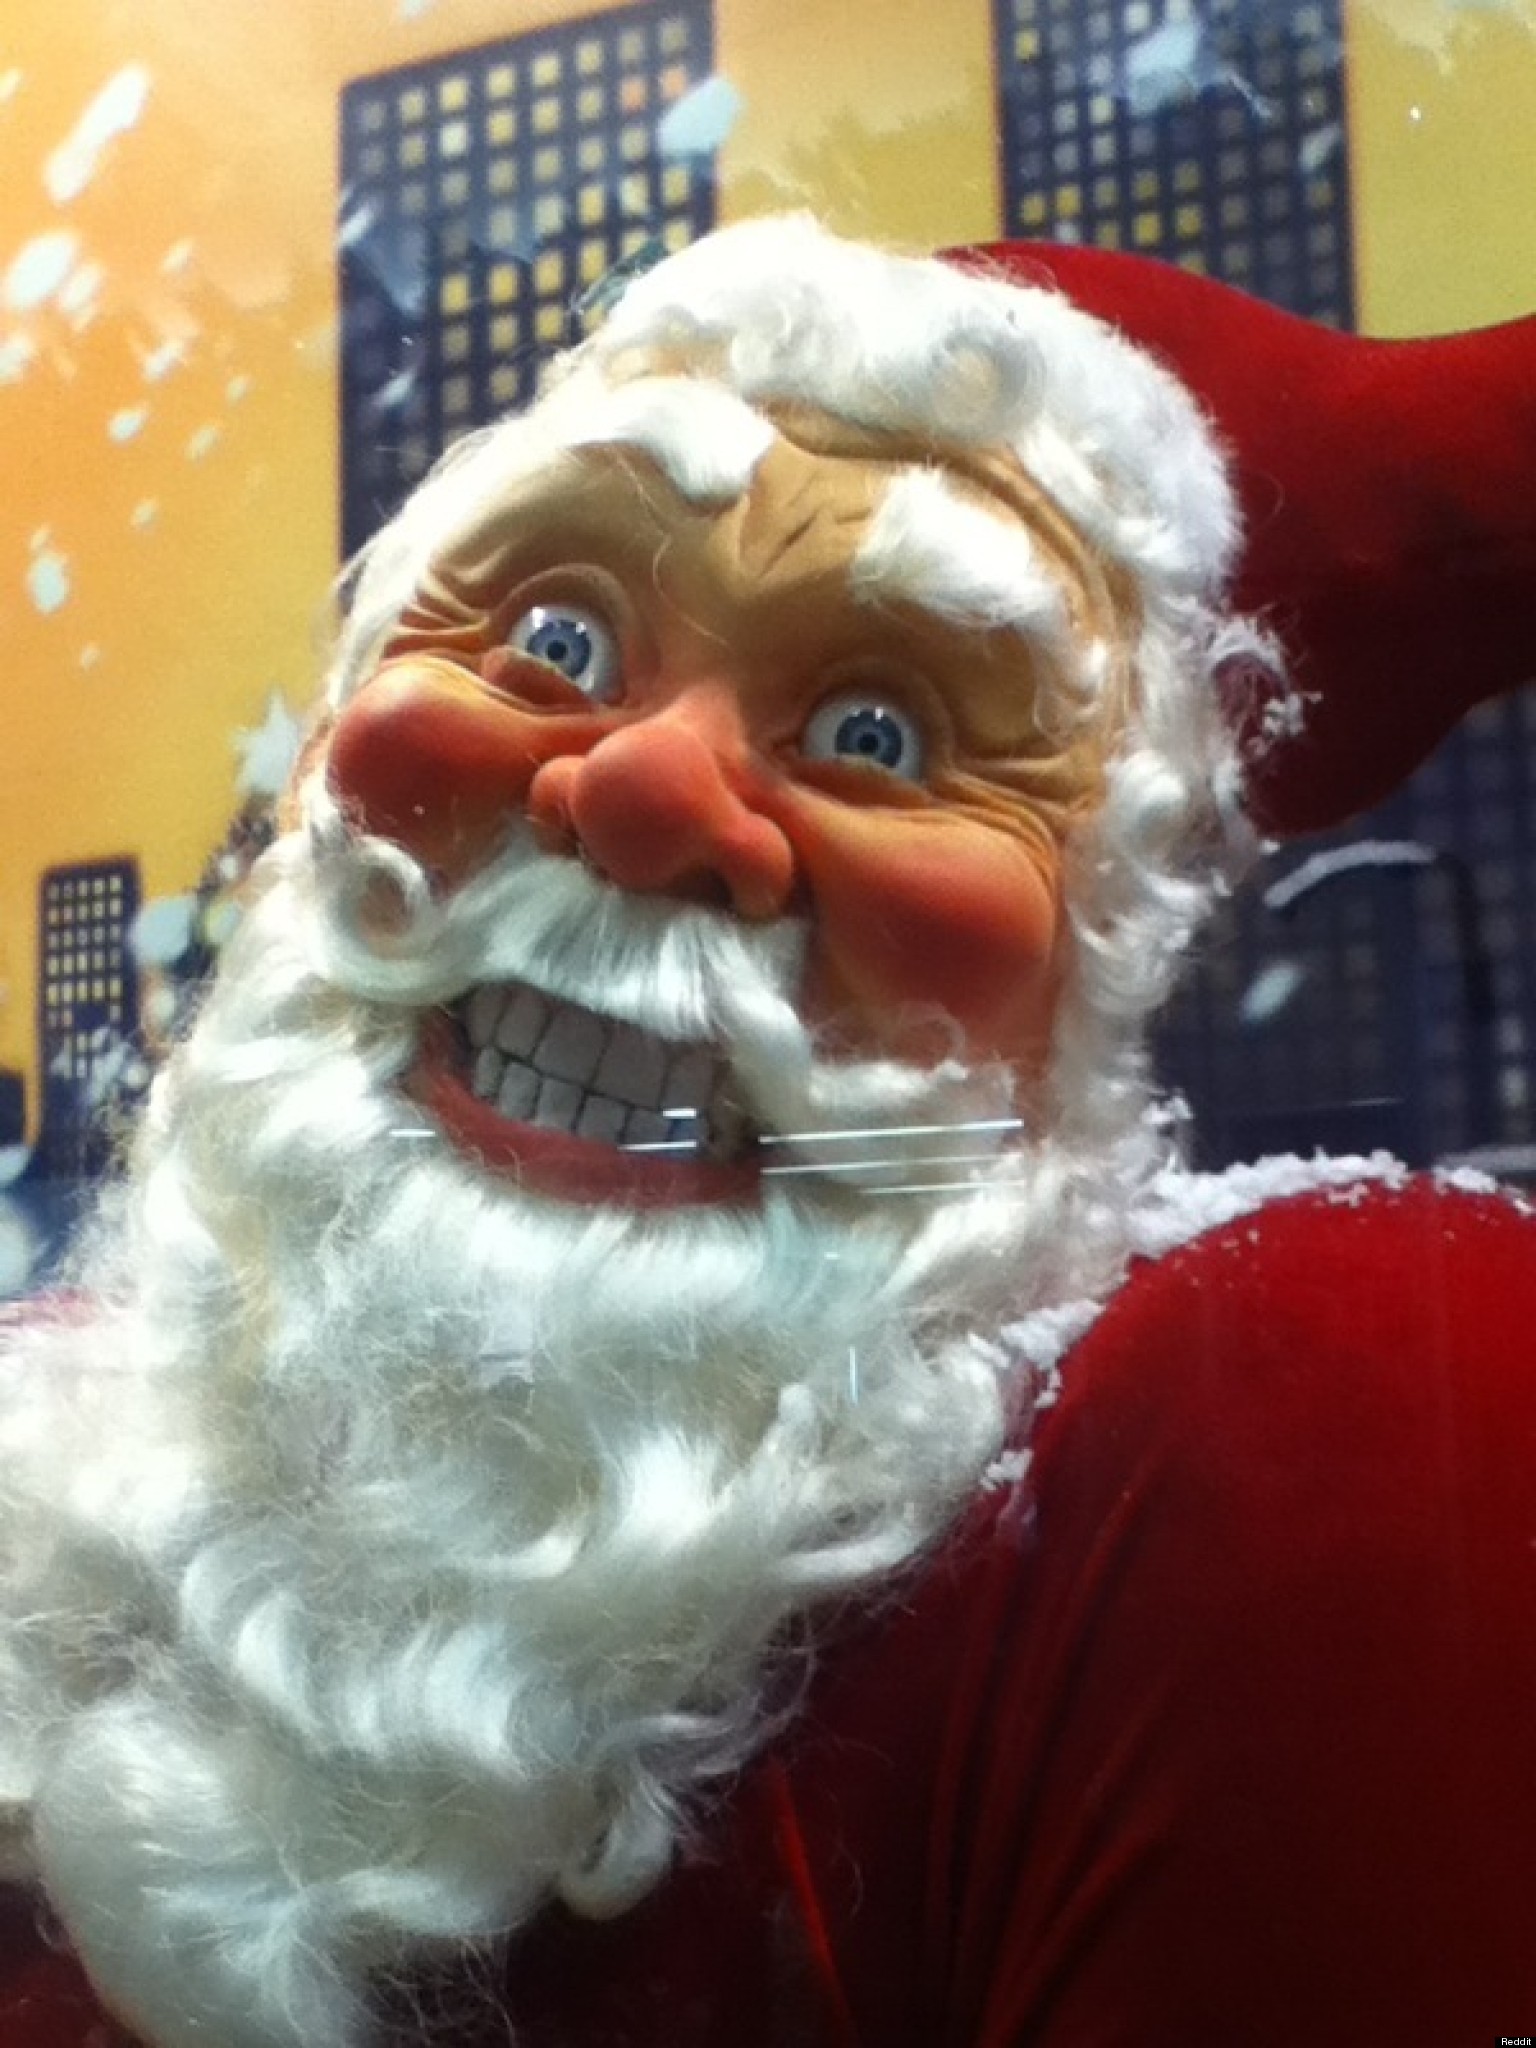 The Creepiest Santa Dolls Ever: 30 Hilariously Bad Depictions Of Ol